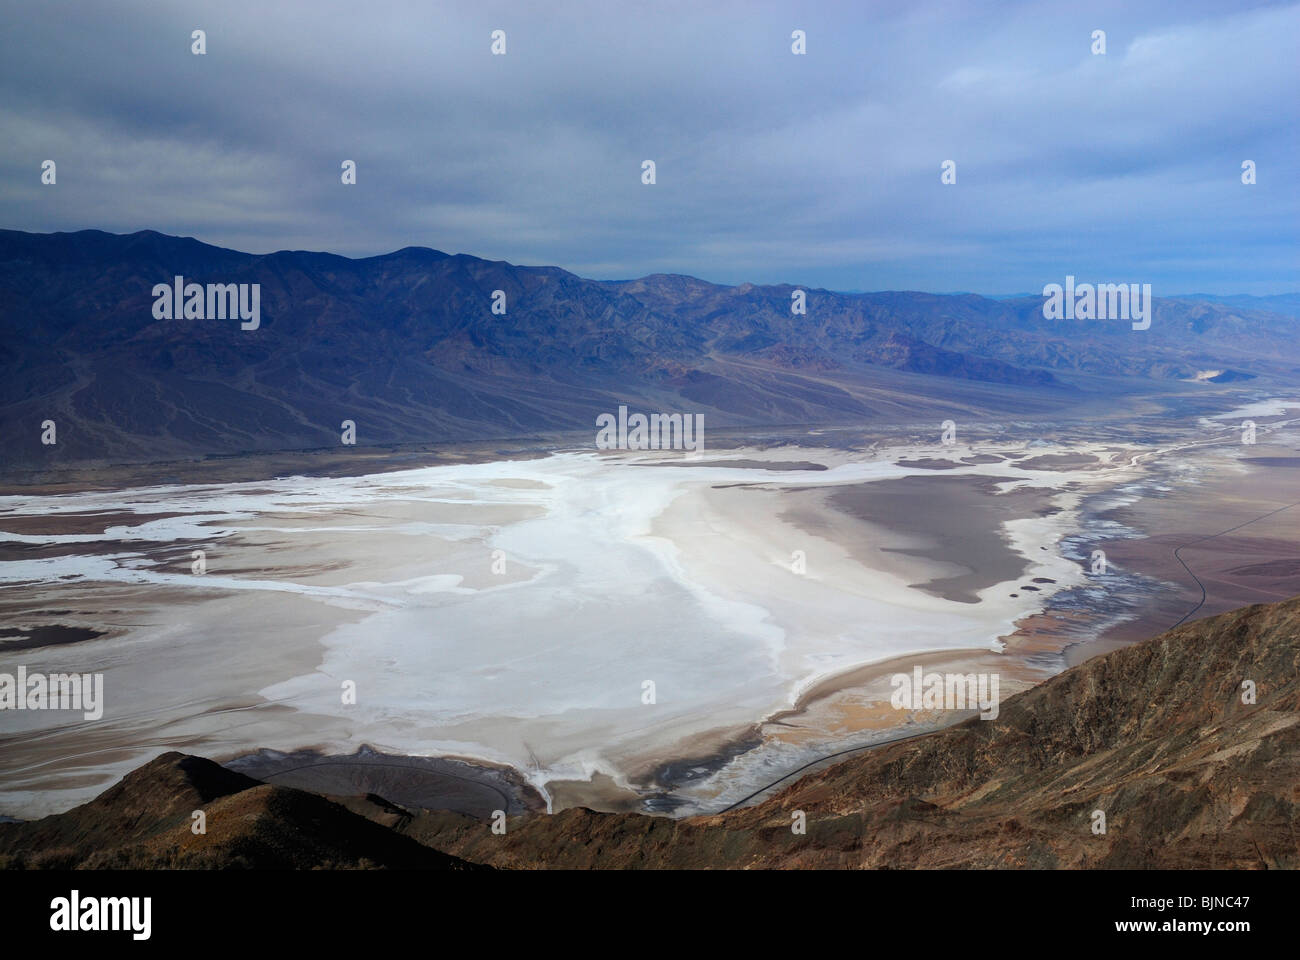 Scenic view of Death Valley, California state Stock Photo